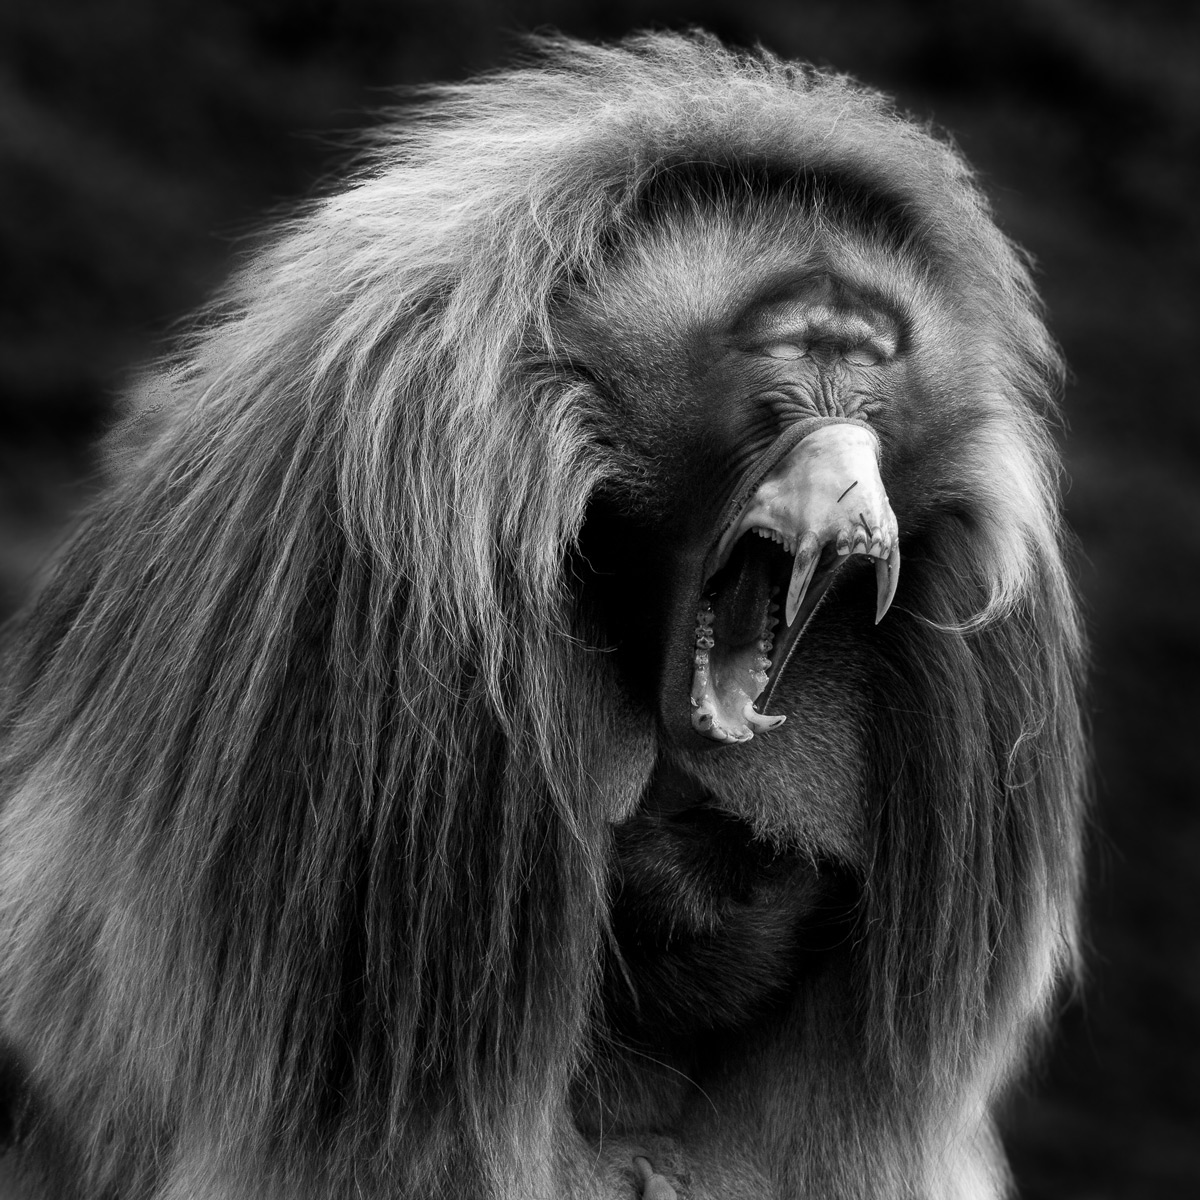 A gelada (also known as a bleeding-heart monkey) yawns in Simien Mountains National Park, Ethiopia © Patrice Quillard